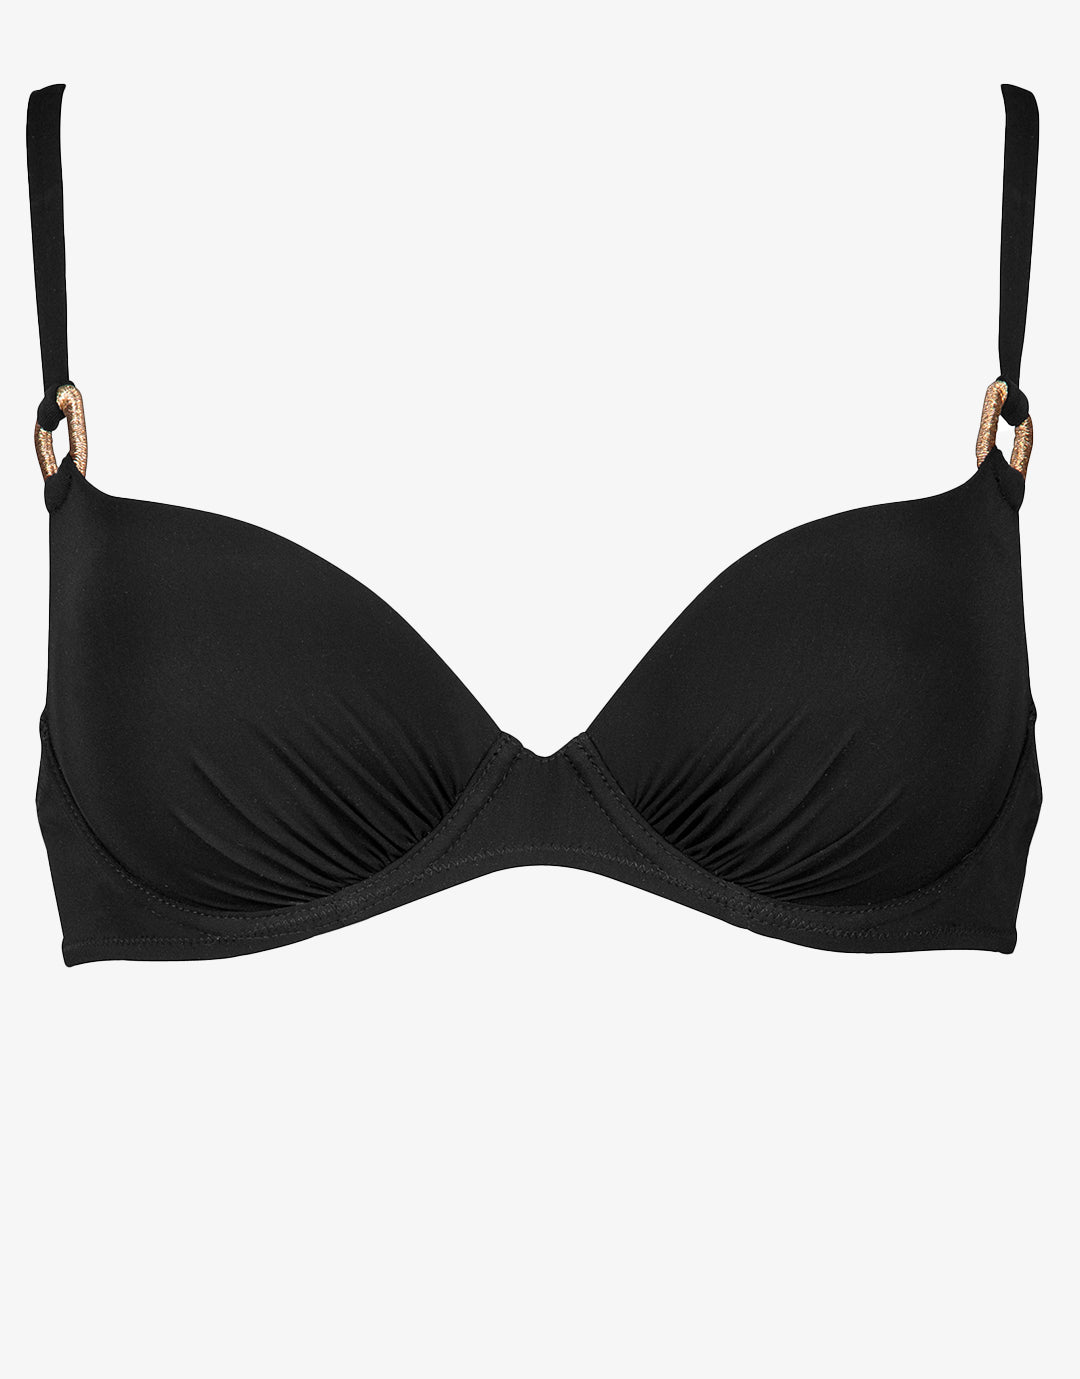 Sailor Luxe Moulded Underwired Bikini Top - Black - Simply Beach UK